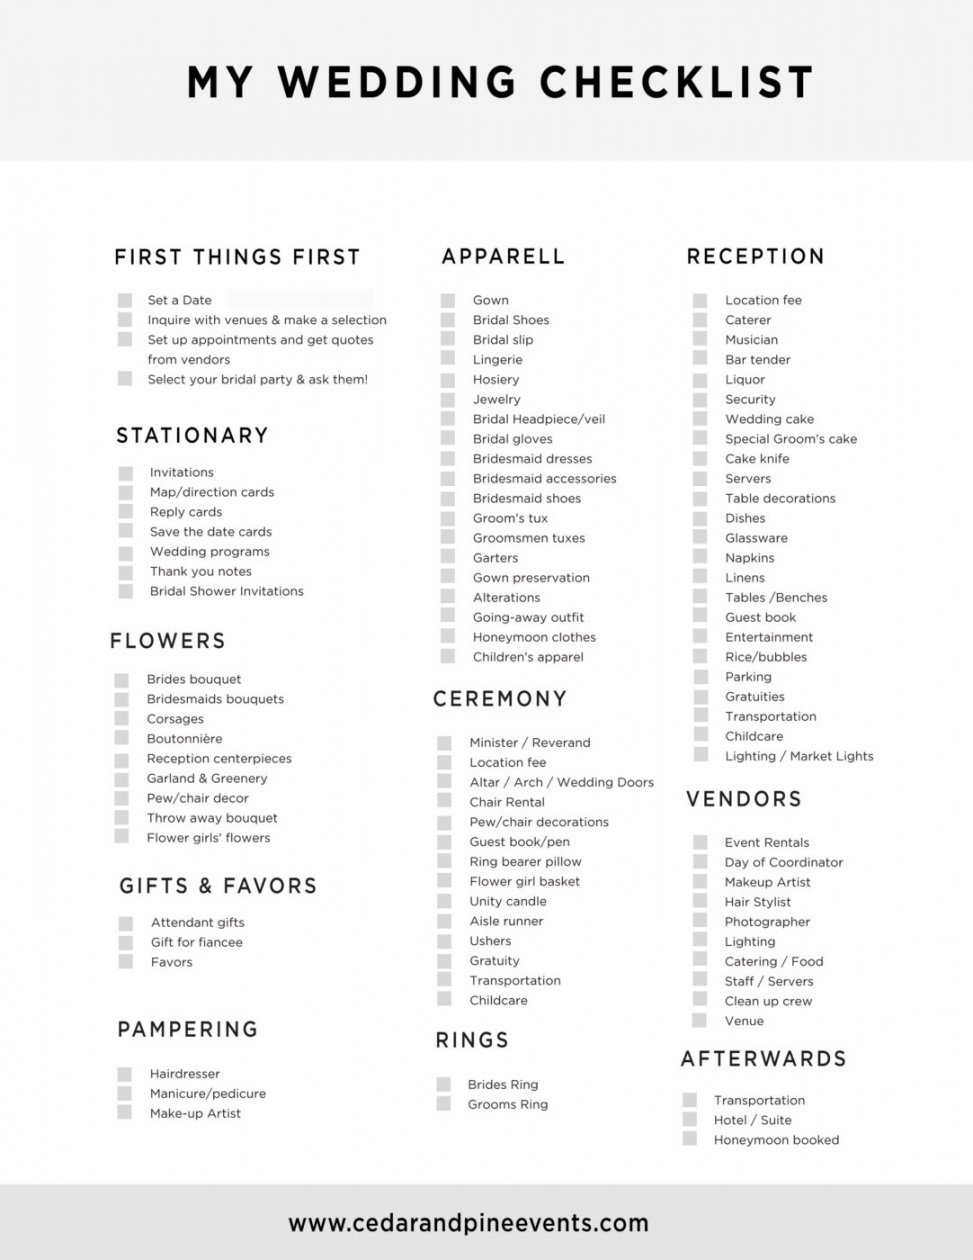 Free Printable Wedding Planning Checklist - Printable - Free Printable Wedding Planning Check List - Cedar And Pine Events